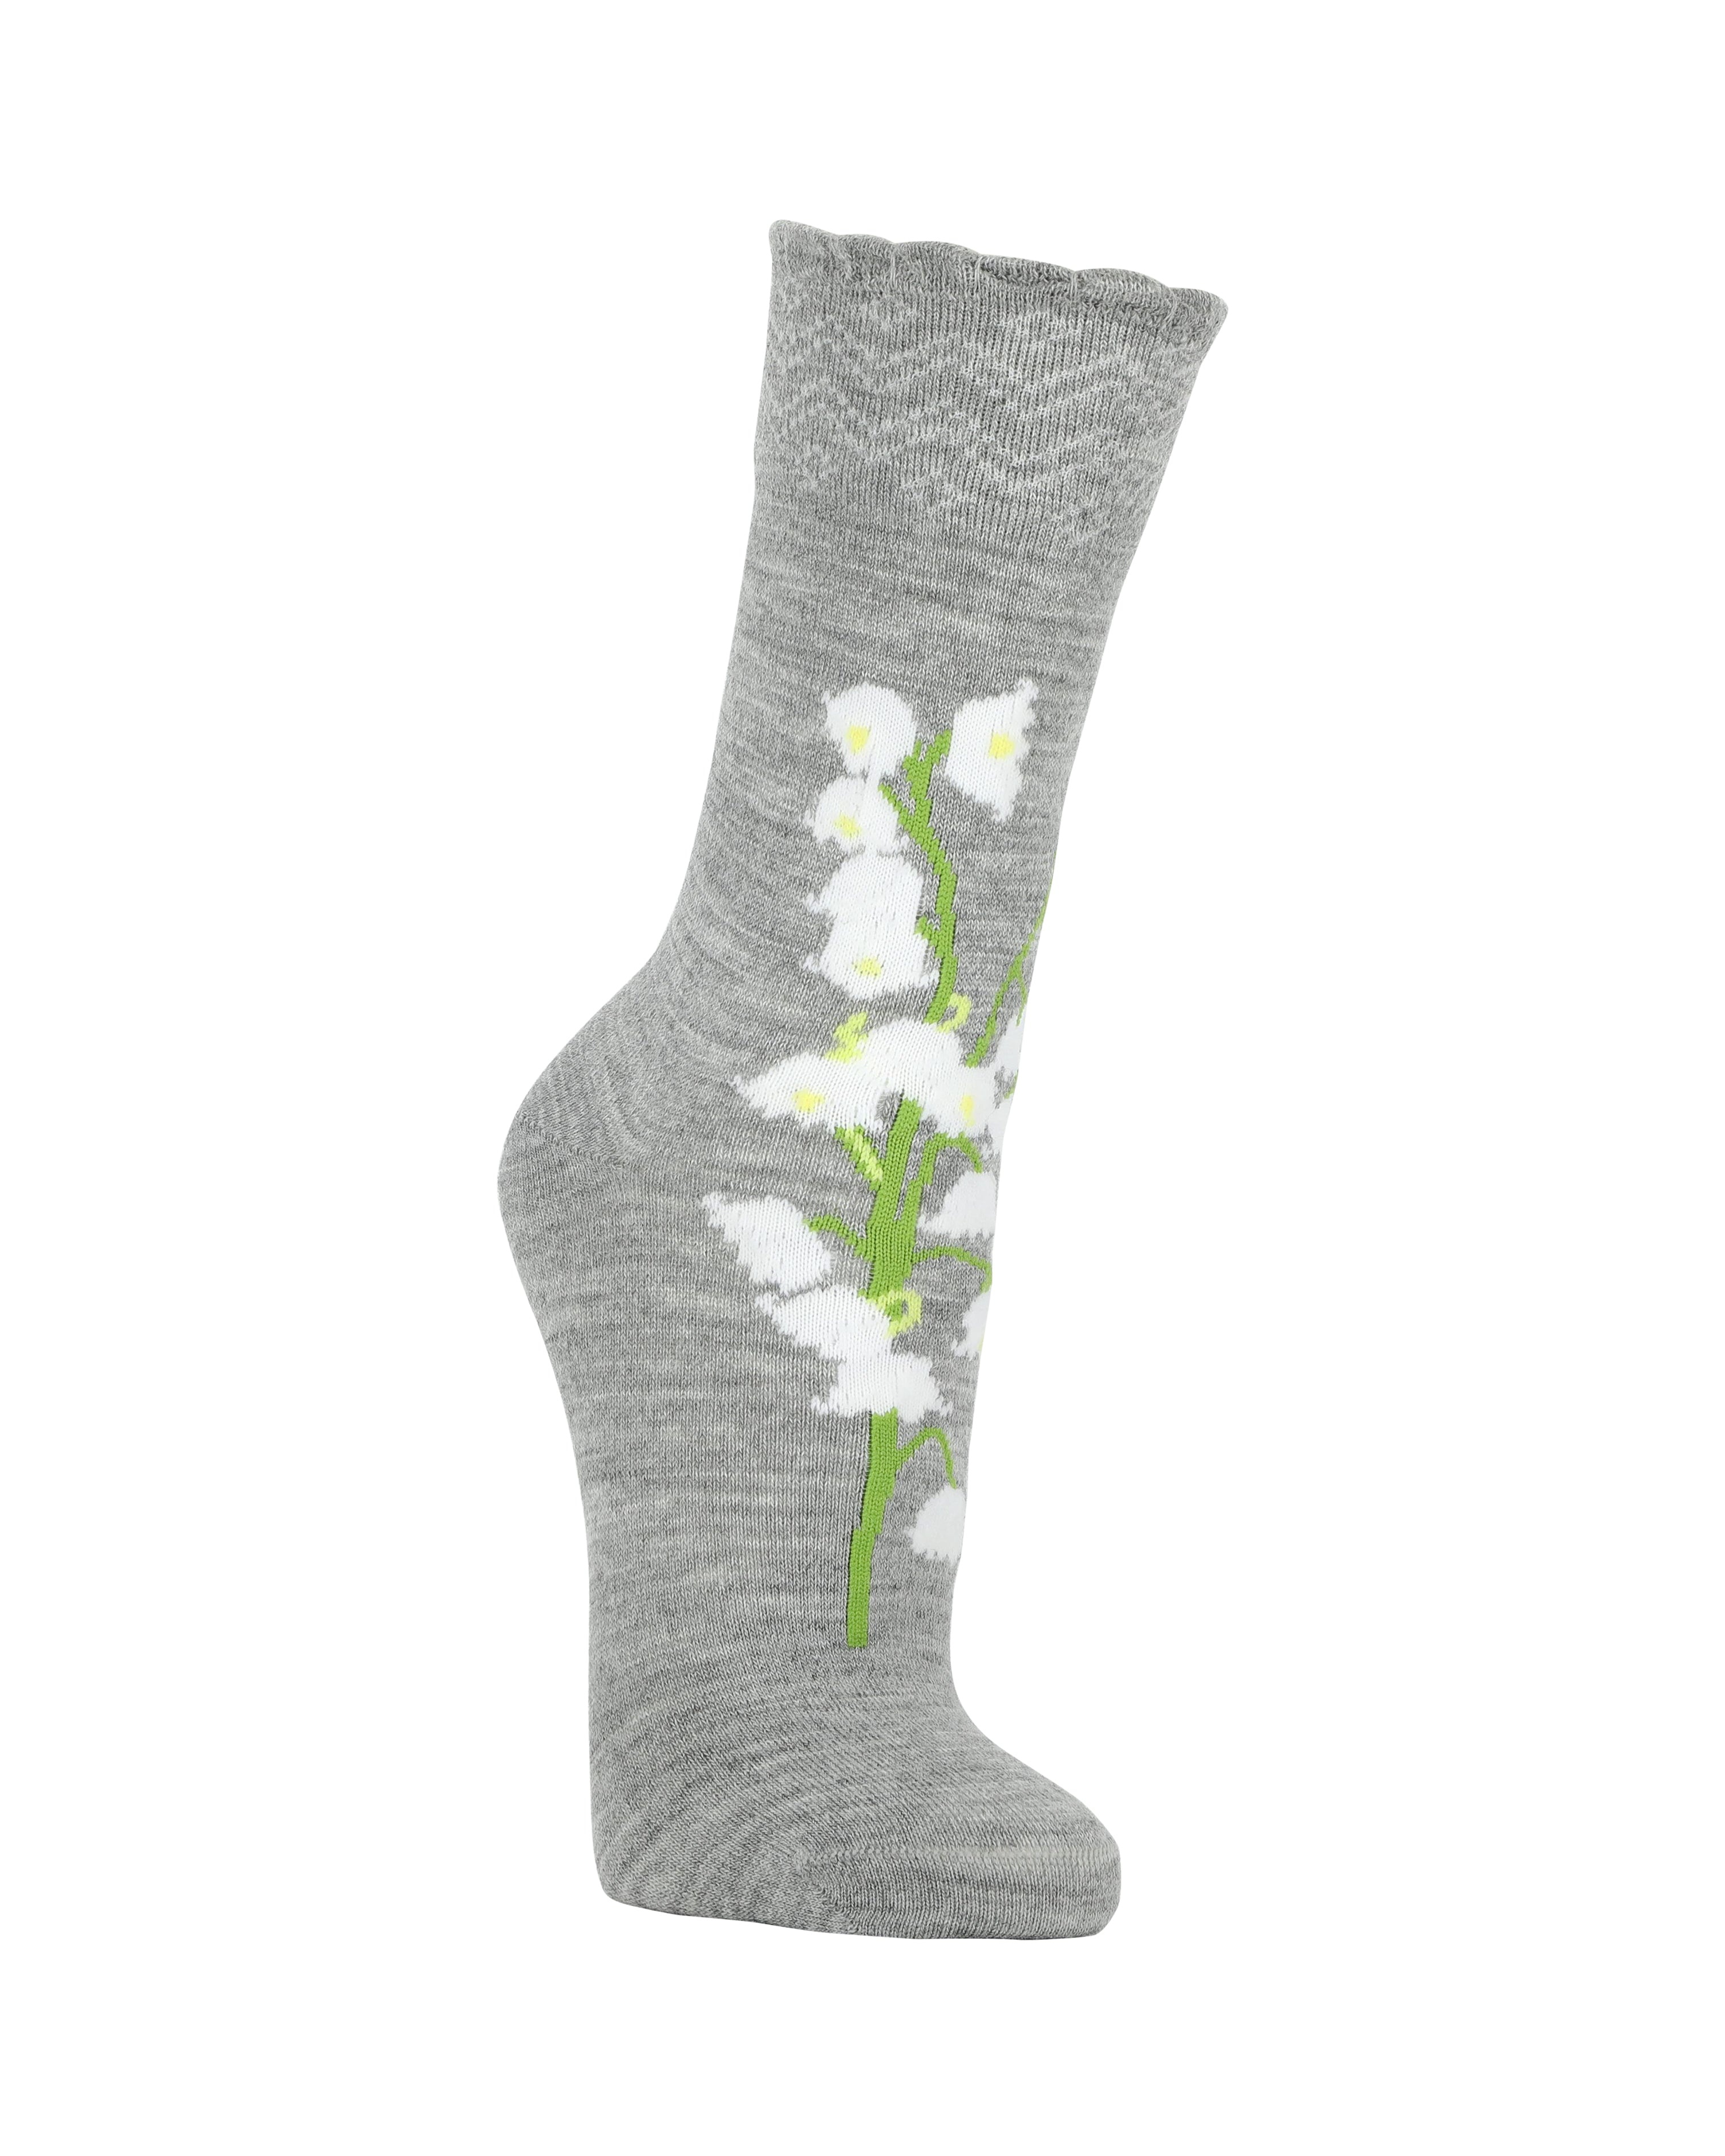 Socks Lily of the Valley - 1